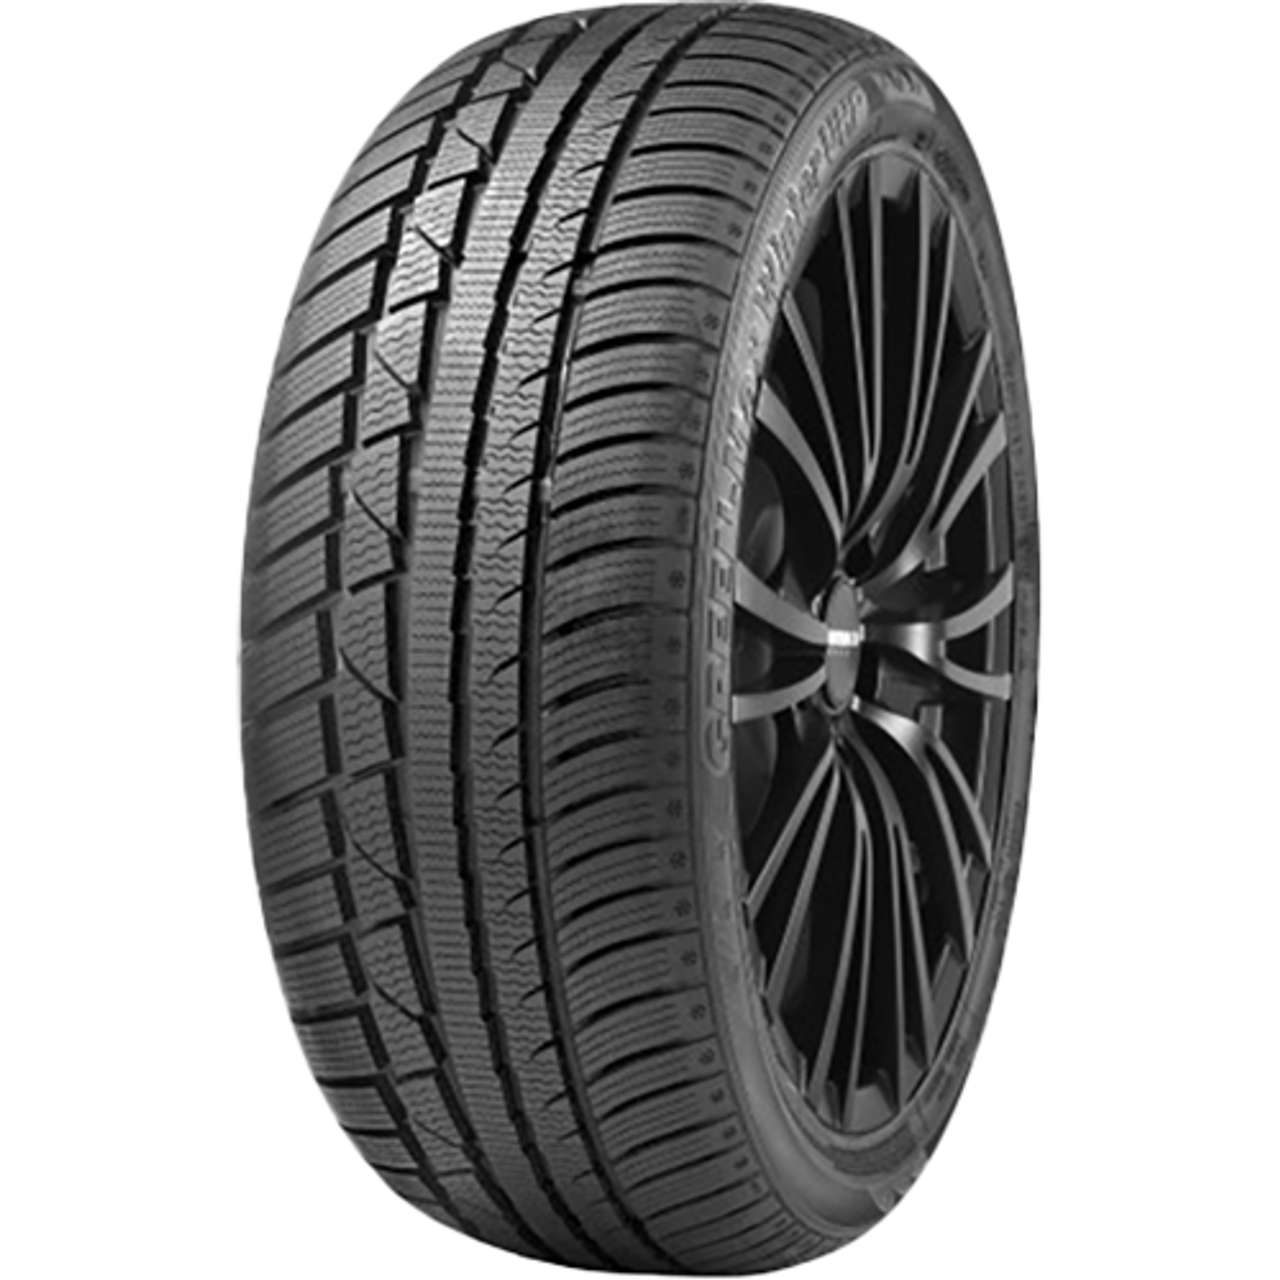 LINGLONG GREEN-MAX WINTER UHP 235/45R18 98V MFS BSW XL